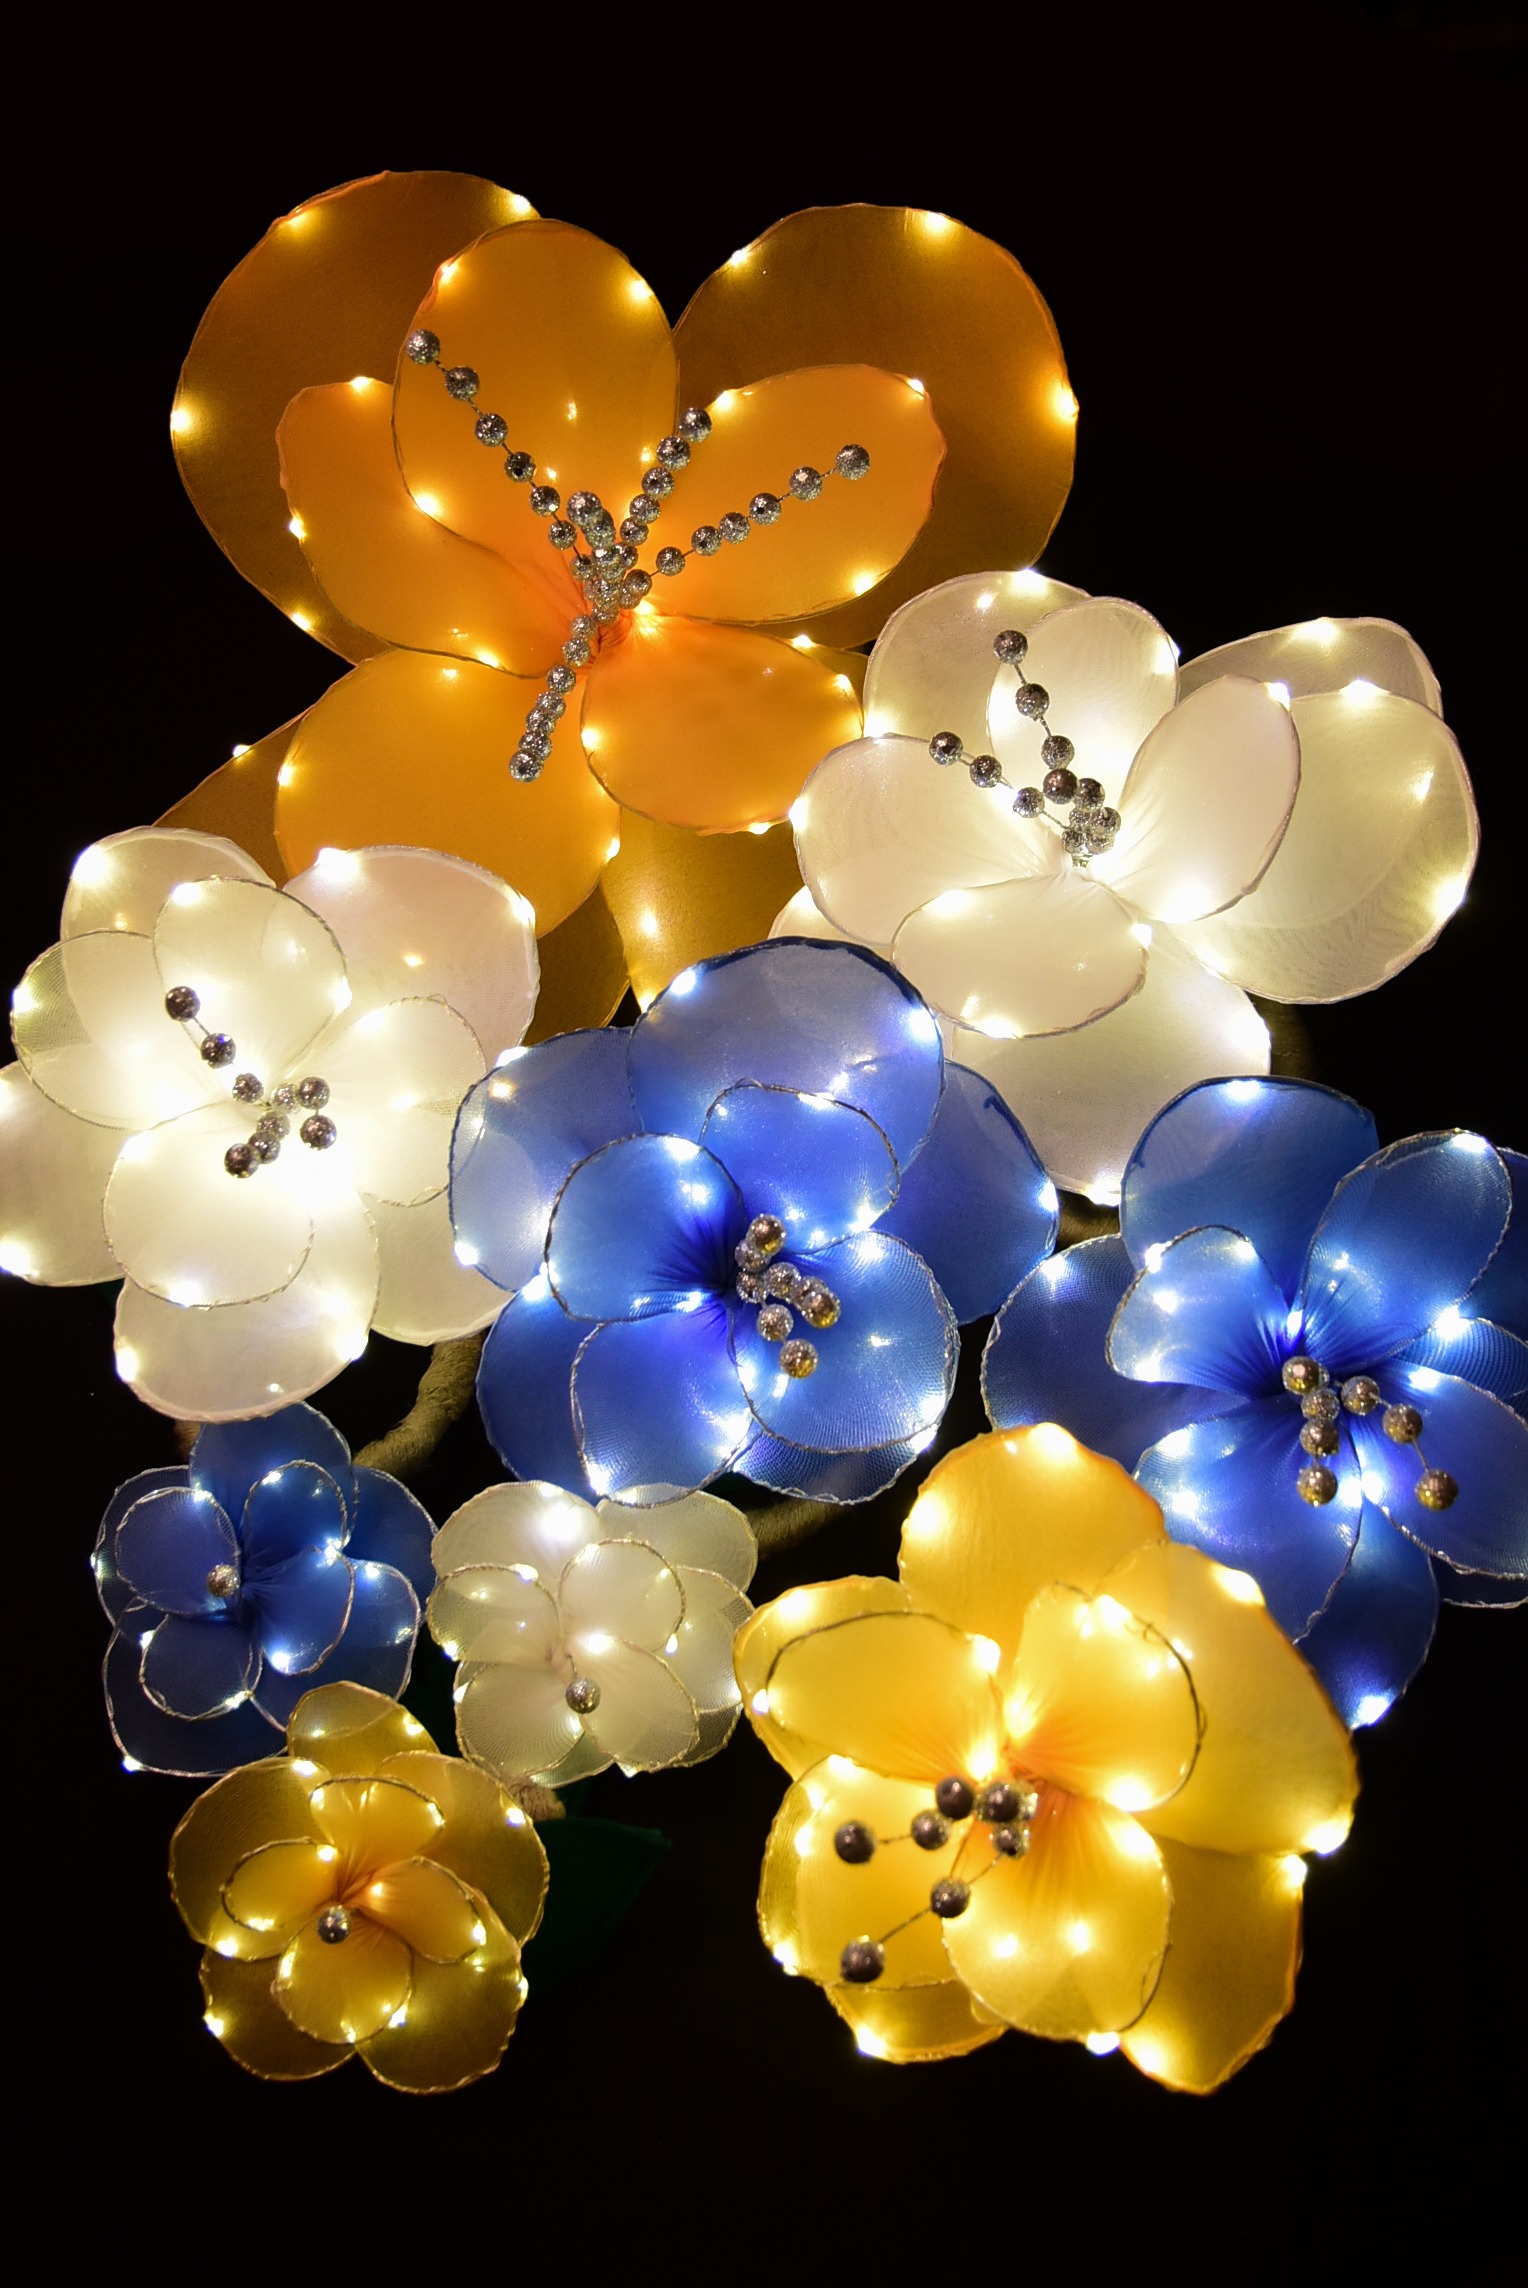 A group of nine light-up flowers is shown. They range in size from five inches to 20 inches, and the colors vary - white, blue, and gold.